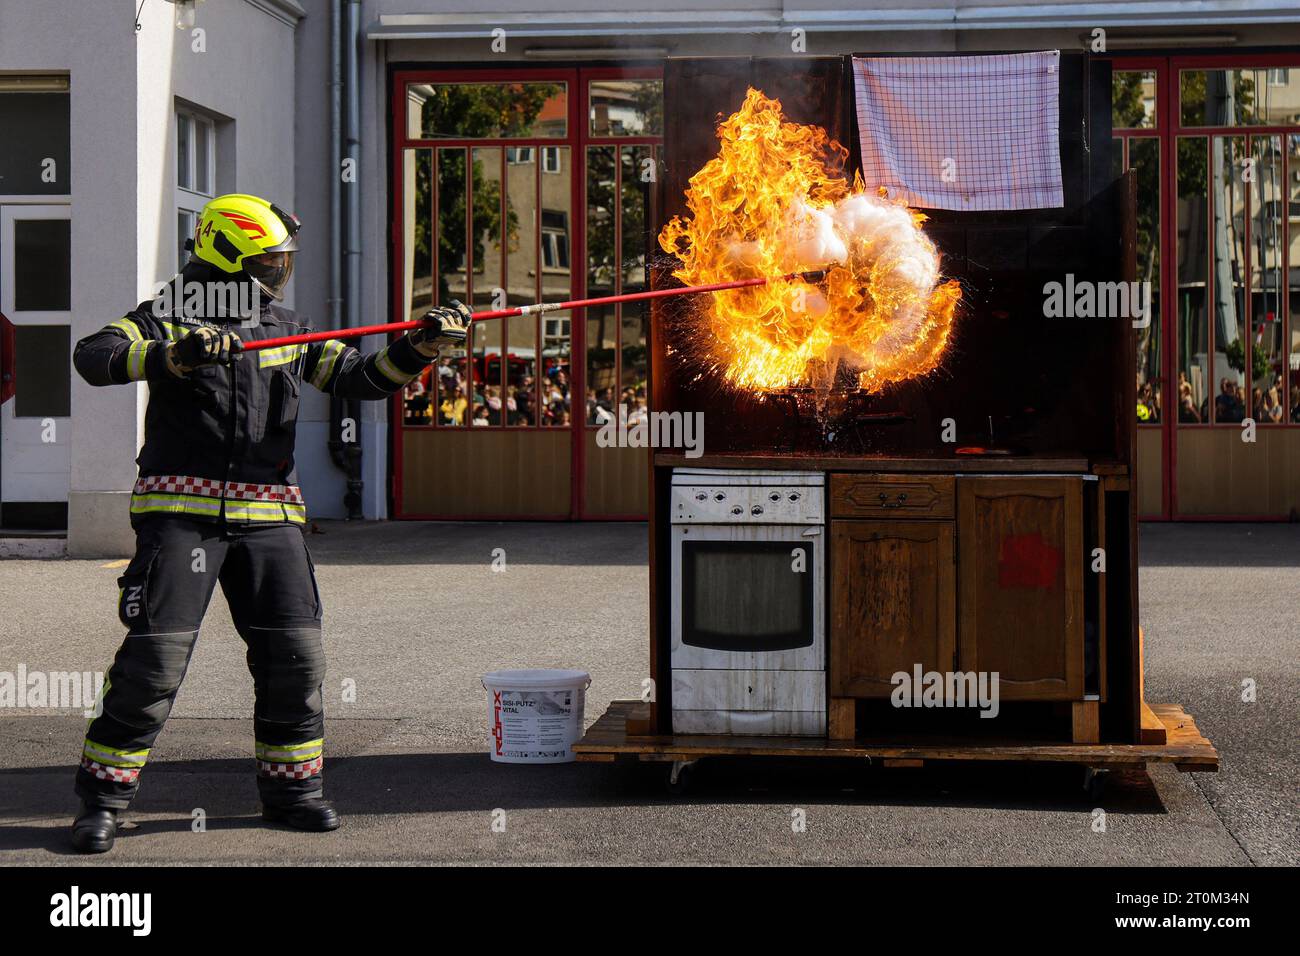 (231008) -- ZAGREB, Oct. 8, 2023 (Xinhua) -- A firefighter demonstrates how to extinguish a fire in the kitchen during the open day of the firefighting brigade in Zagreb, Croatia, Oct. 7, 2023. (Luka Stanzl/PIXSELL via Xinhua) Stock Photo